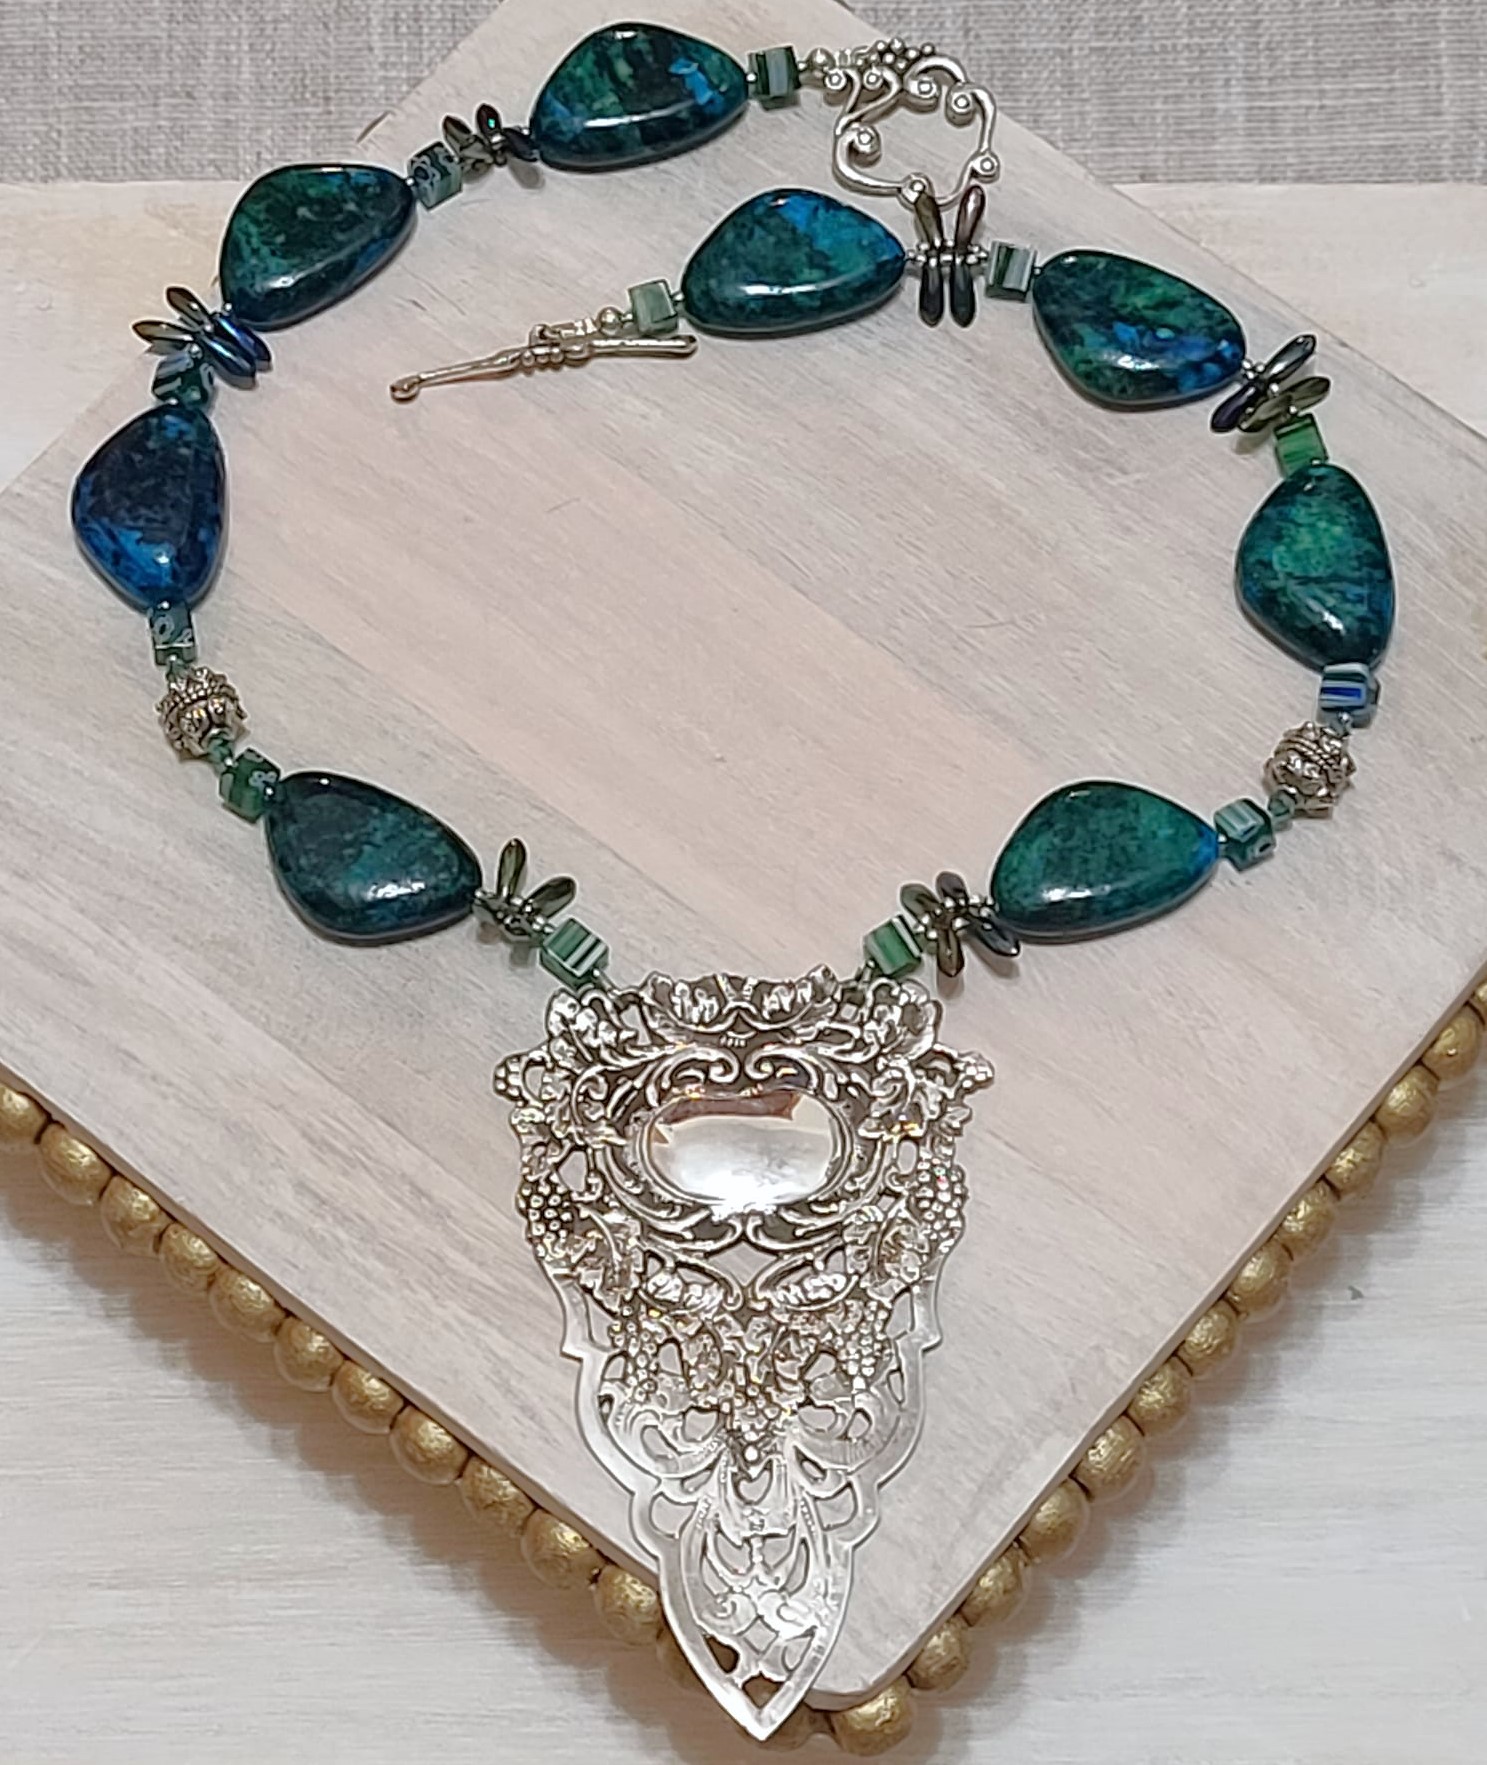 Hancrafted statement necklace,green chrysocolla, sterling silver